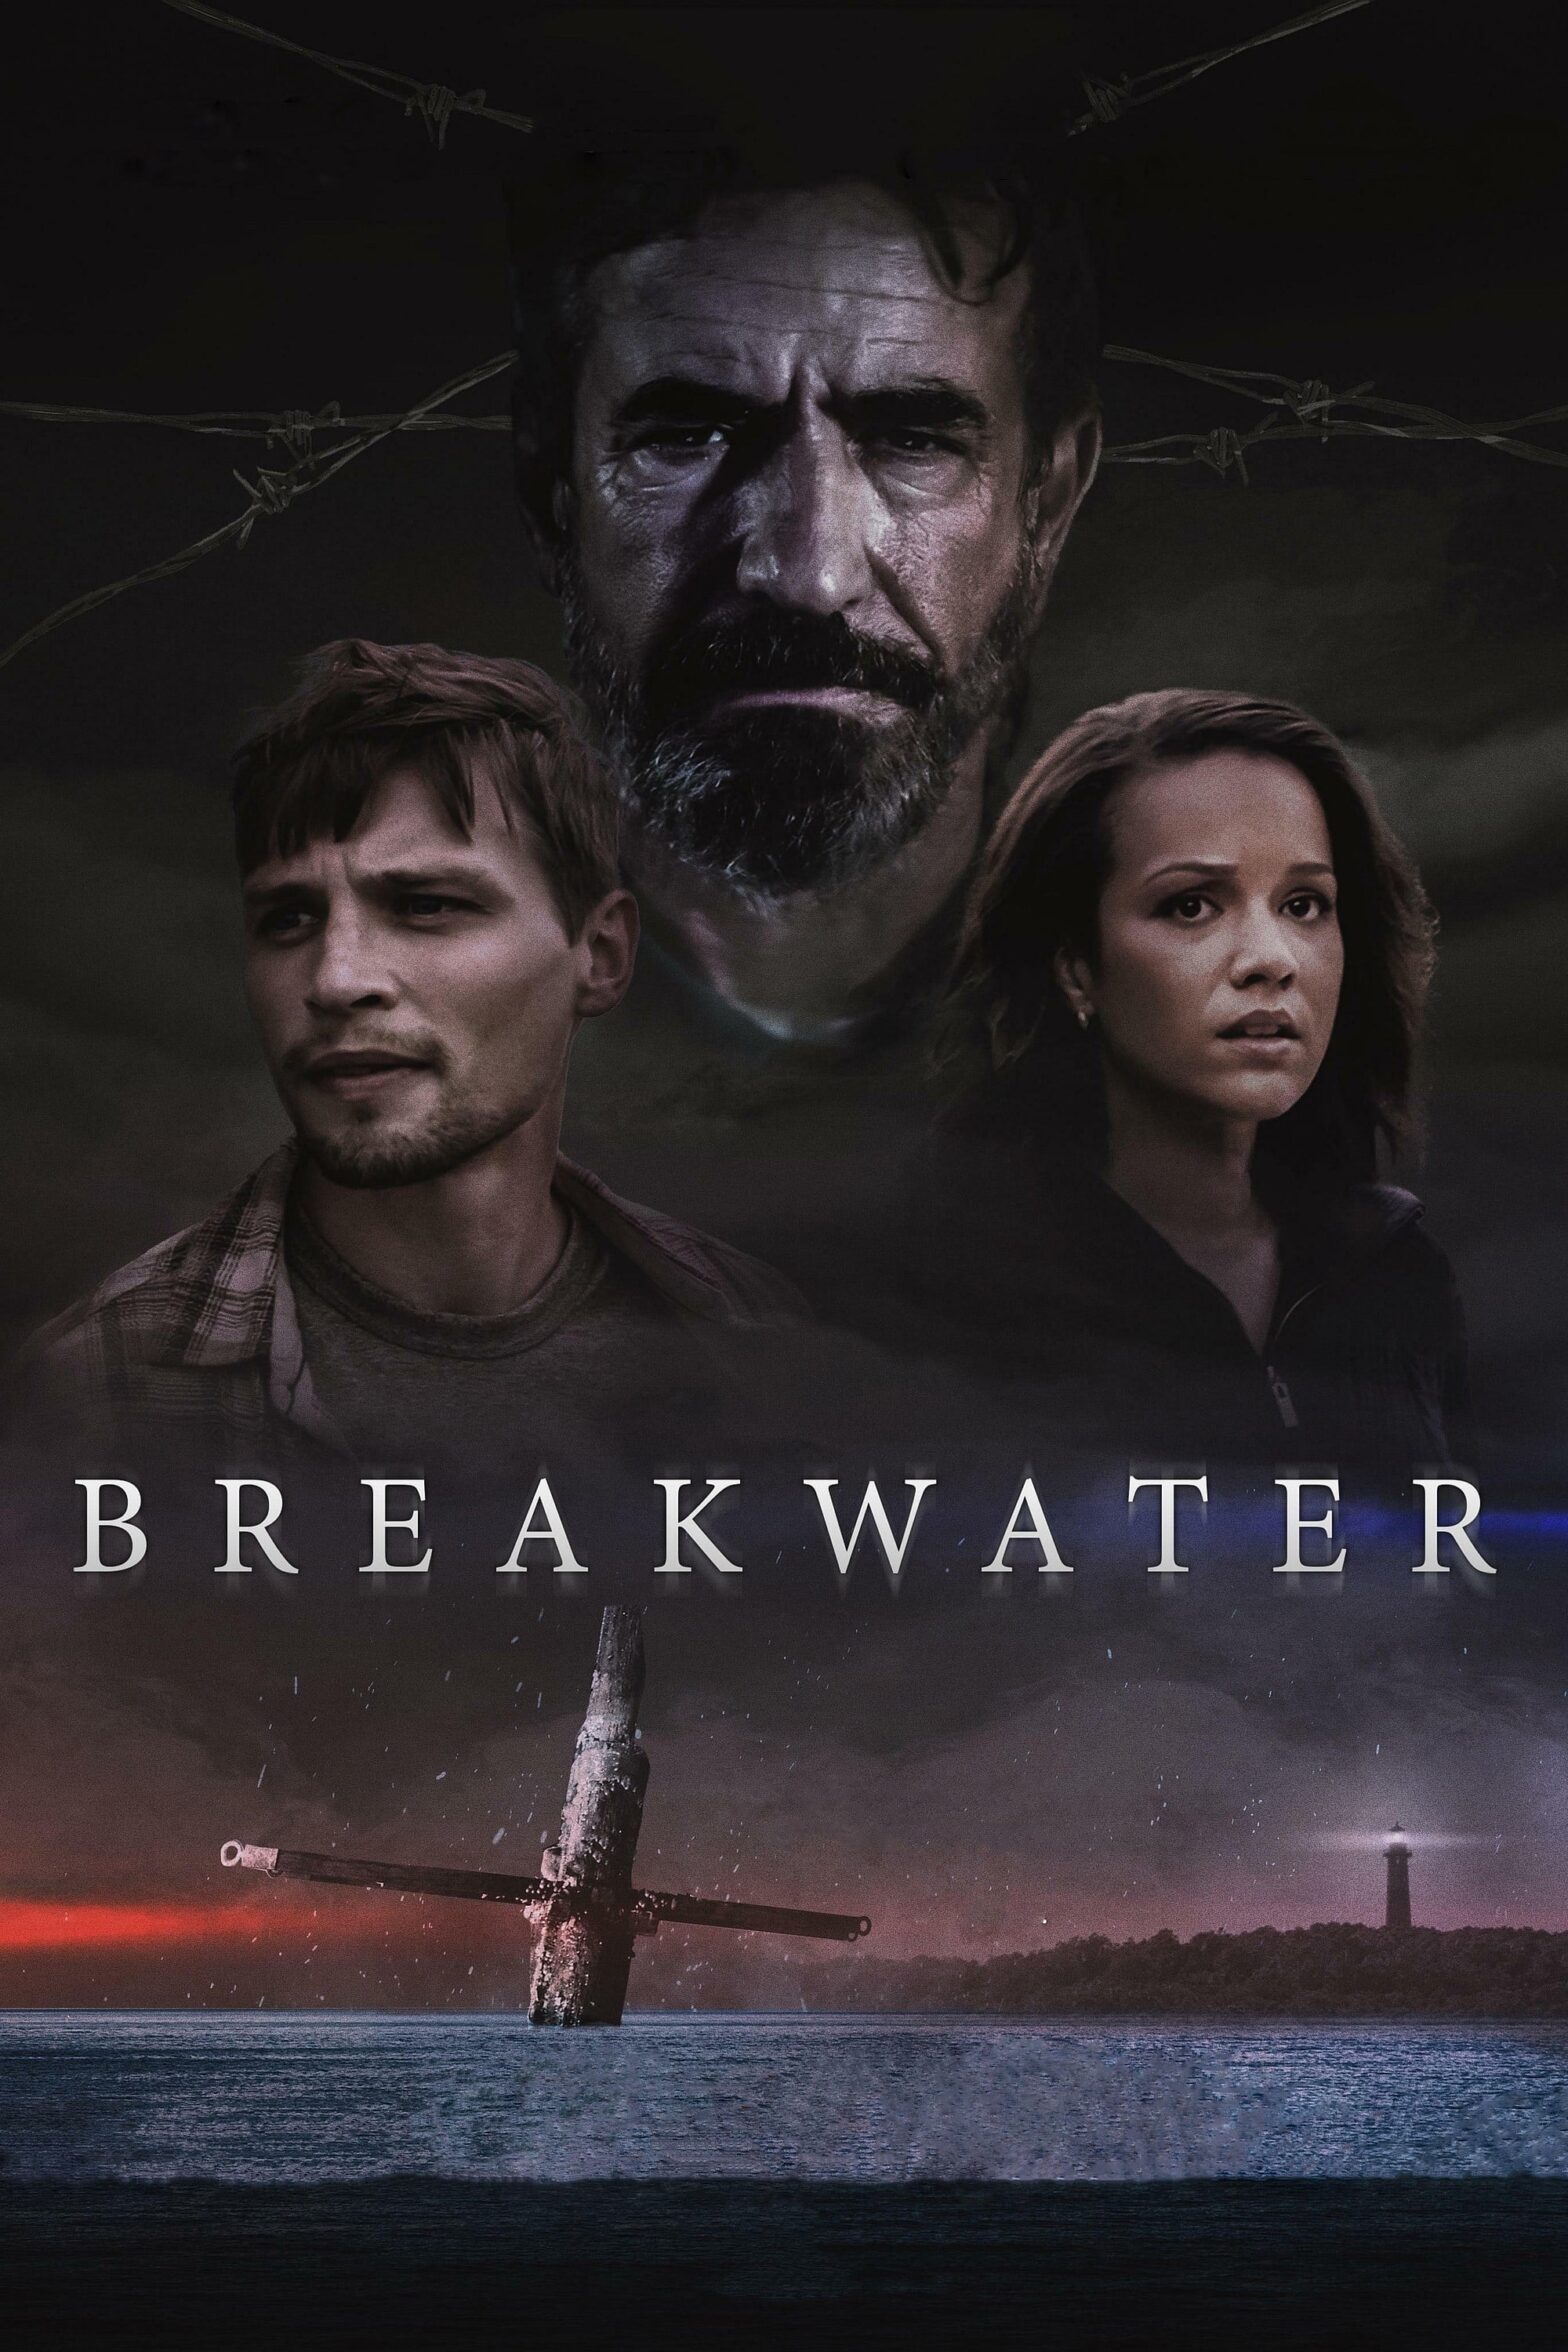 Poster for the movie "Breakwater"